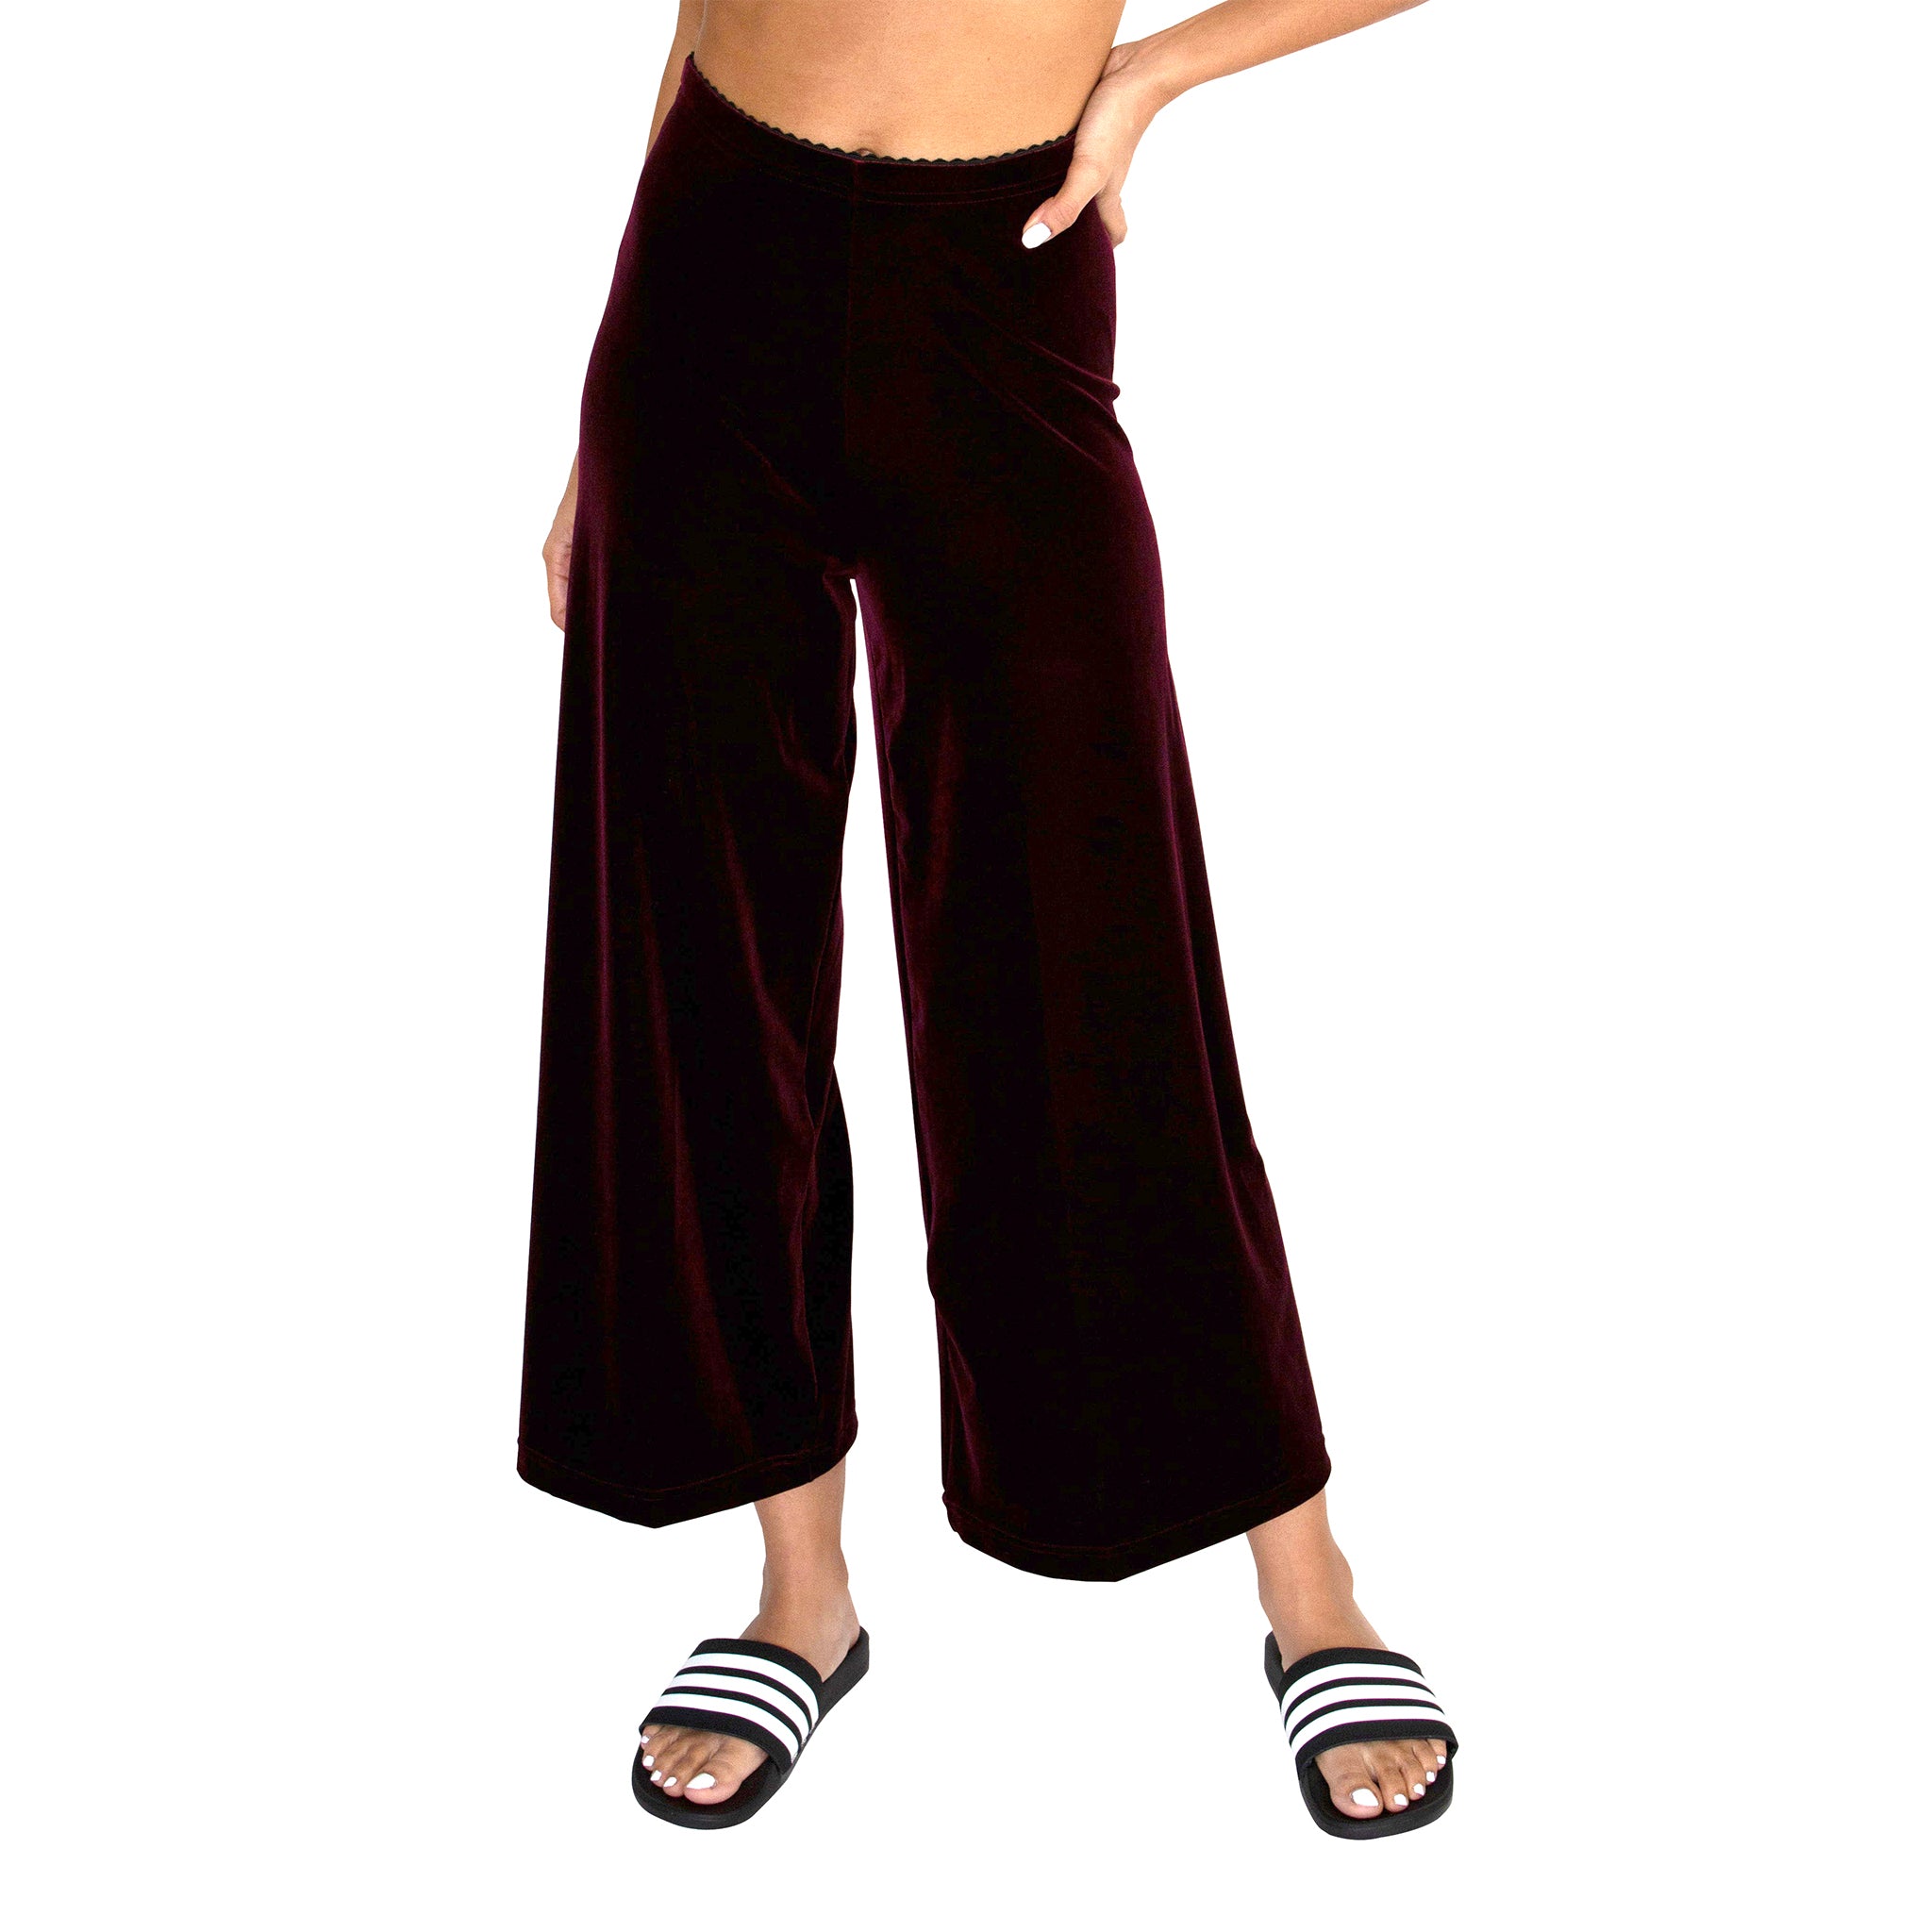 Front view of our Cropped Length Stretch Velvet Pant in Sangria Wine has elastic waist and 26" inseam.